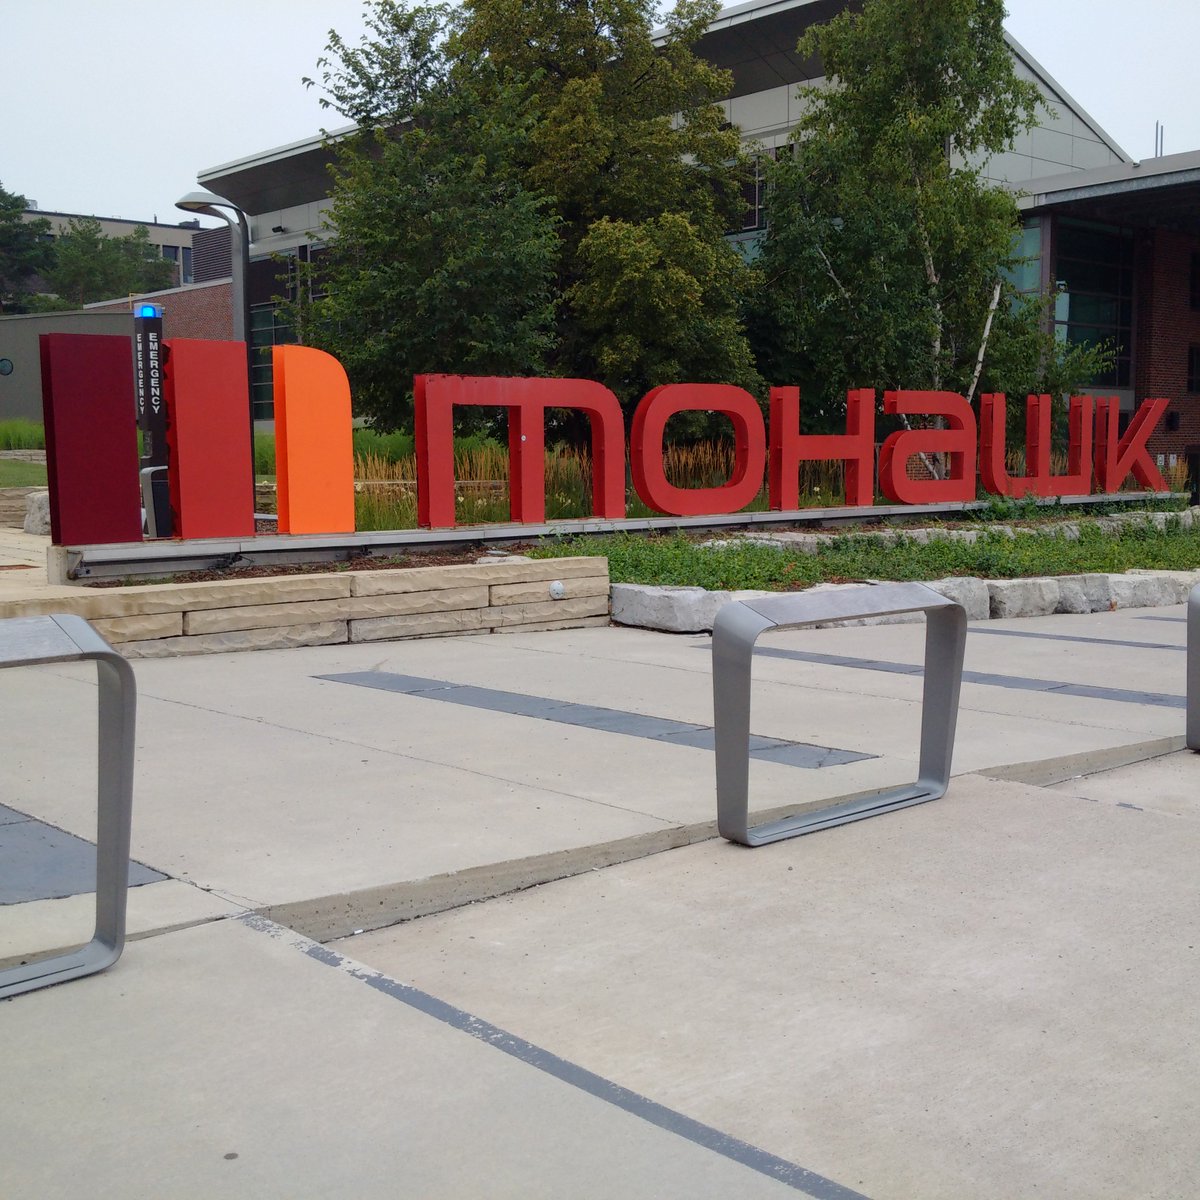 In a statement, Mohawk College says it will extend December classes into January due to the current strike action at Ontario colleges.